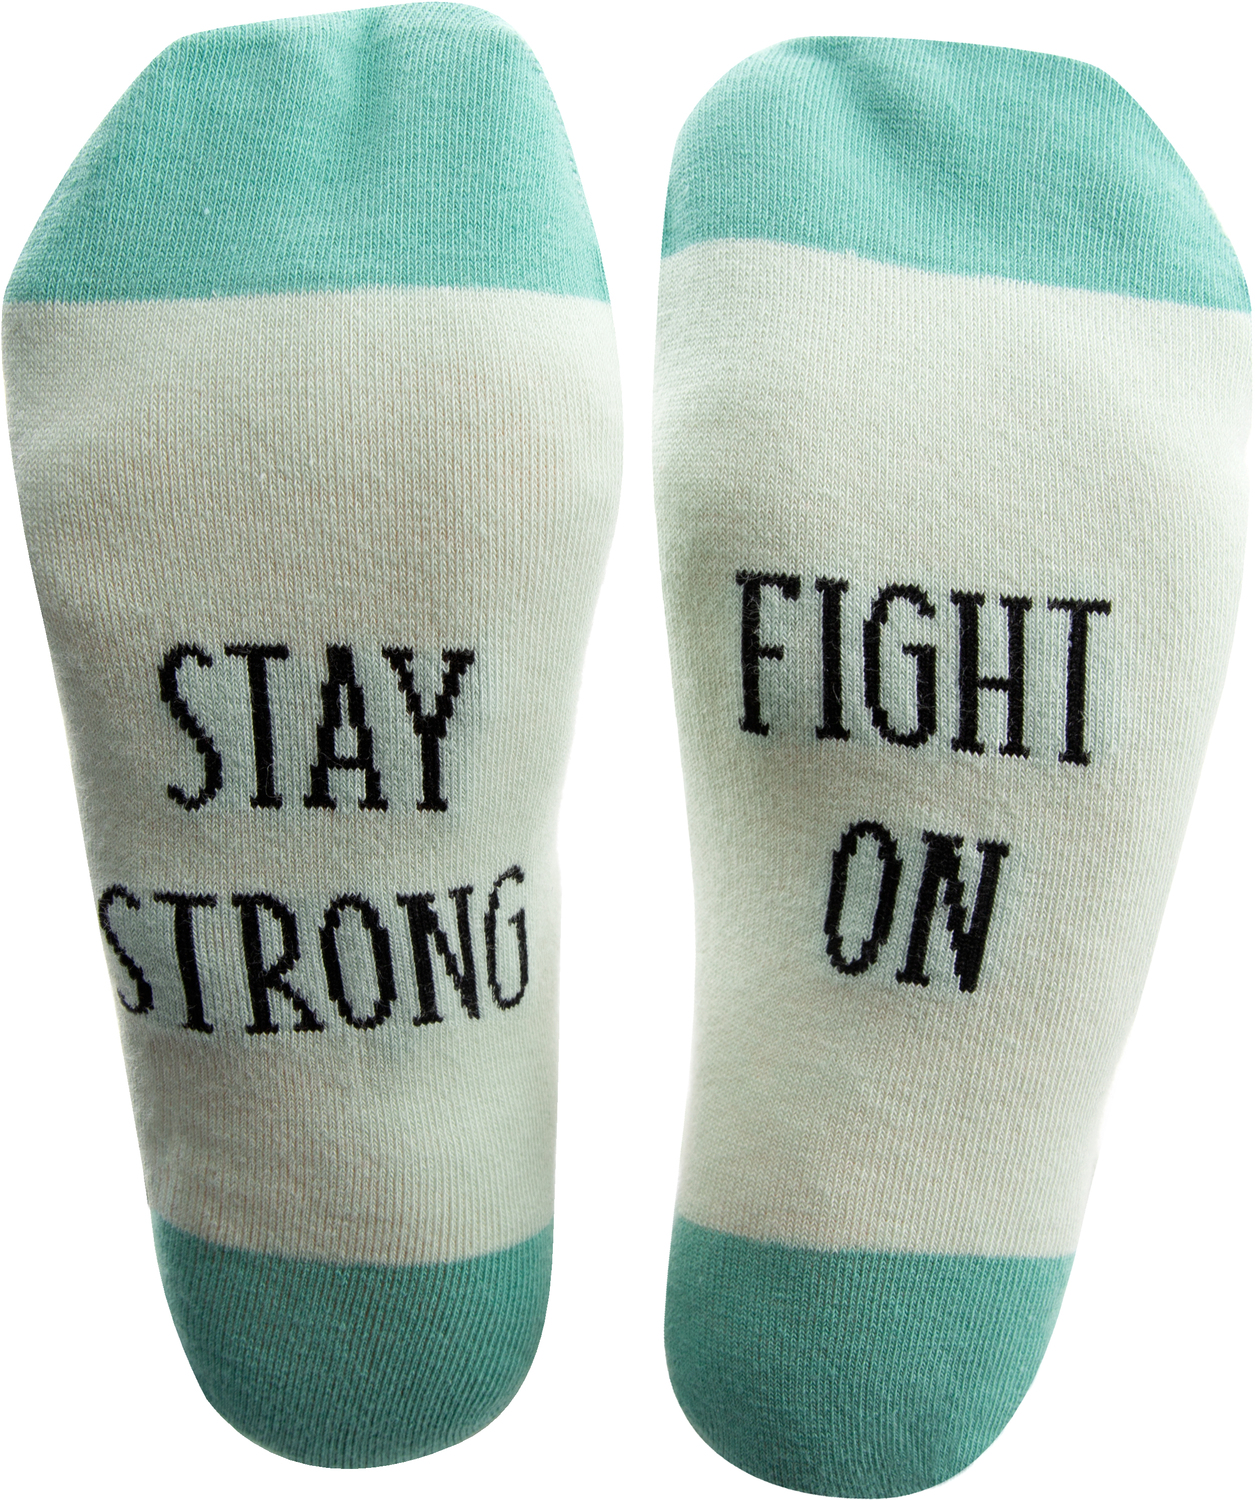 Stay Strong by Faith Hope and Healing - Stay Strong - M/L Unisex Sock